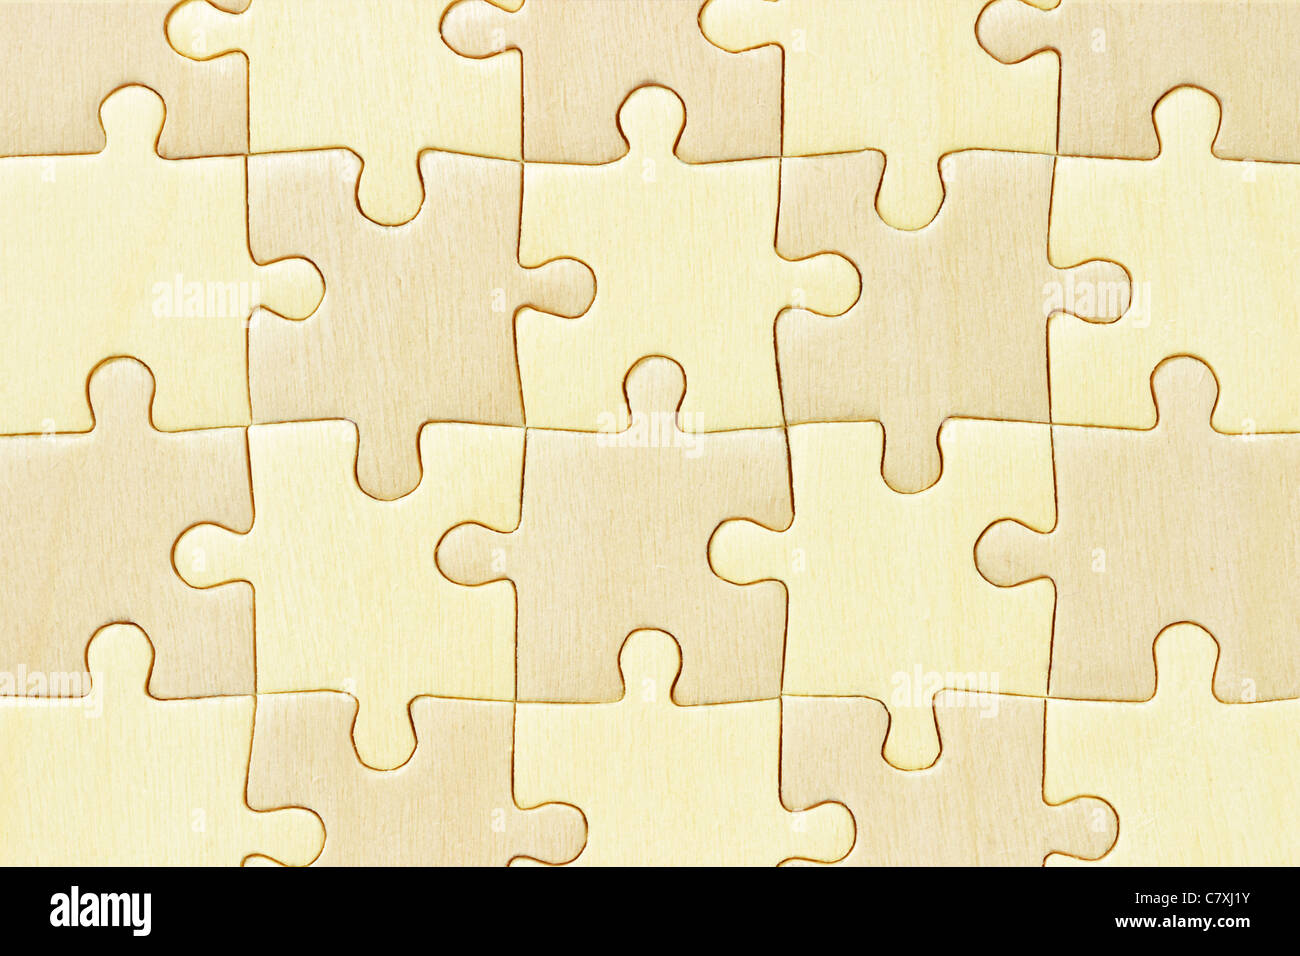 Close up image of checkered wooden jigsaw puzzle background Stock Photo